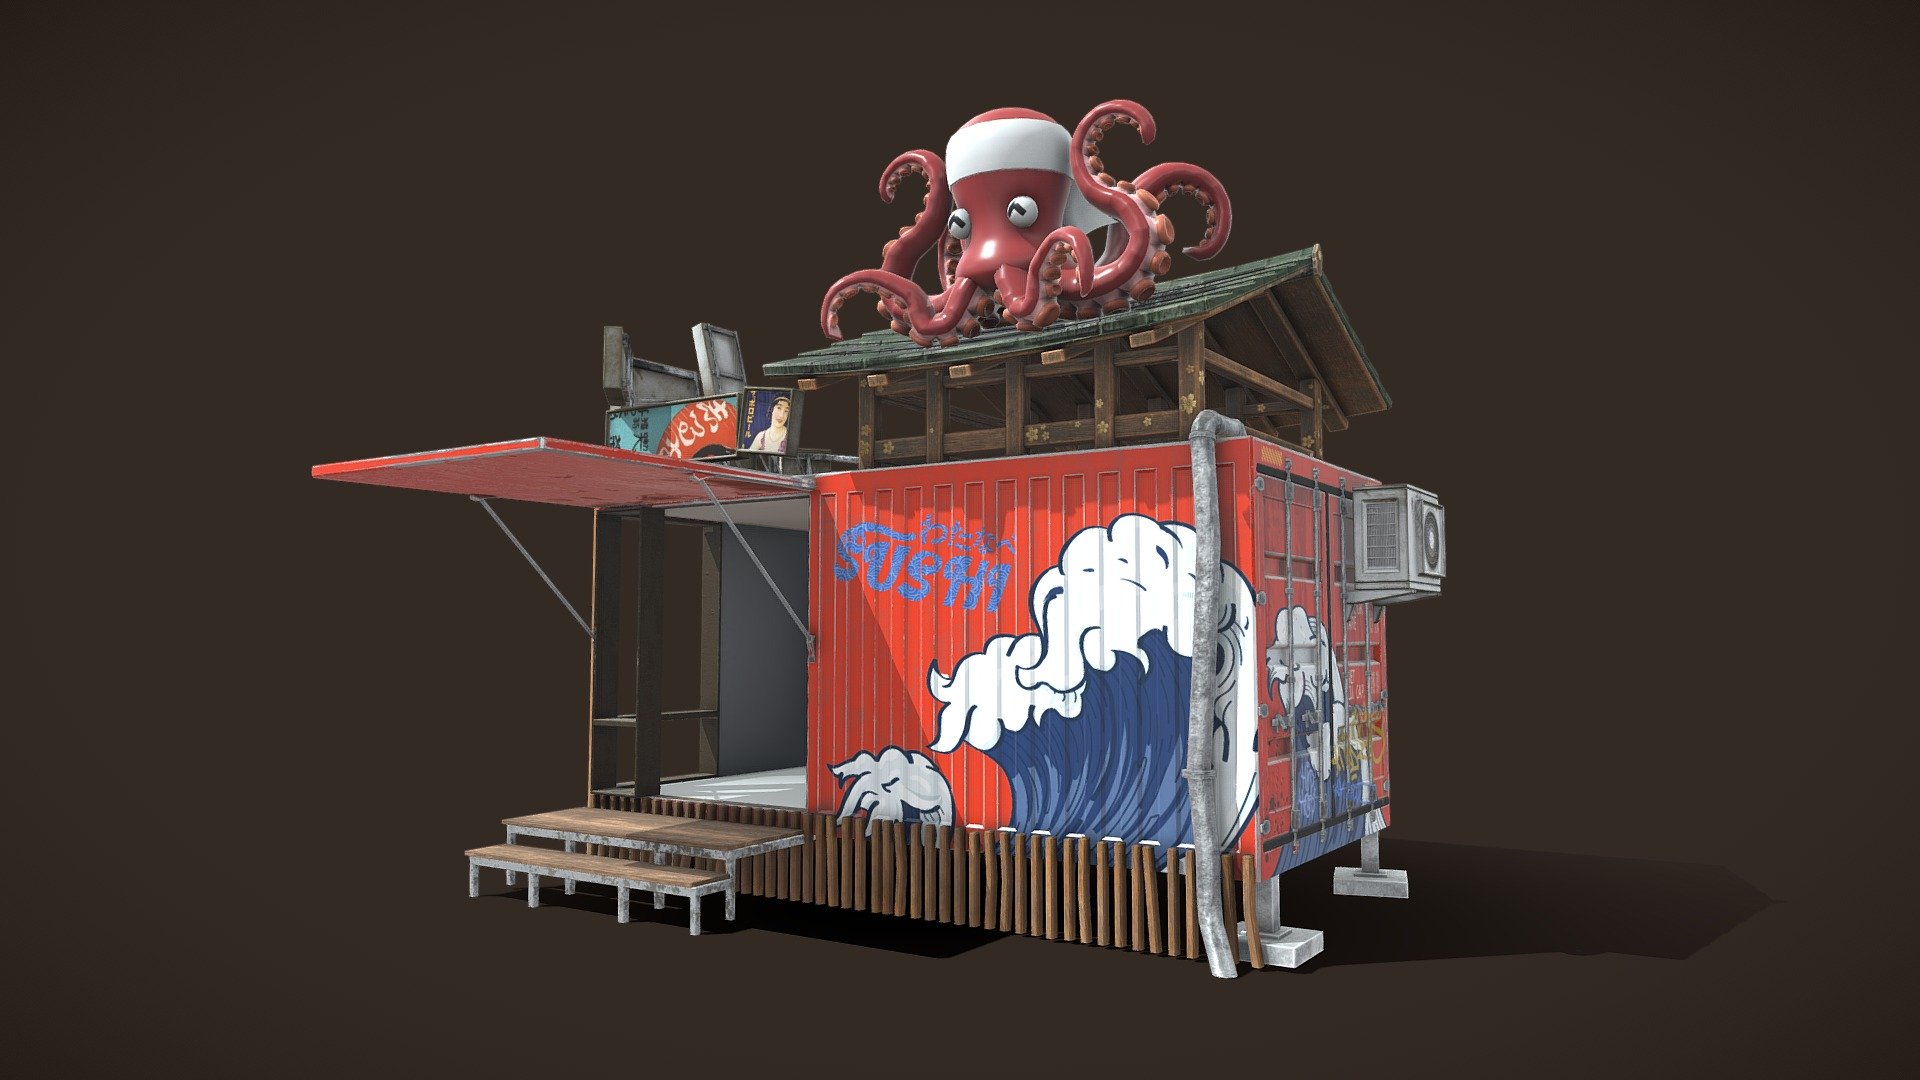 I'm a big fan of Japan, and of container architecture. So, here is my take on a suburban Izakaya in a small container.

The name in kanjis わたなべ spells